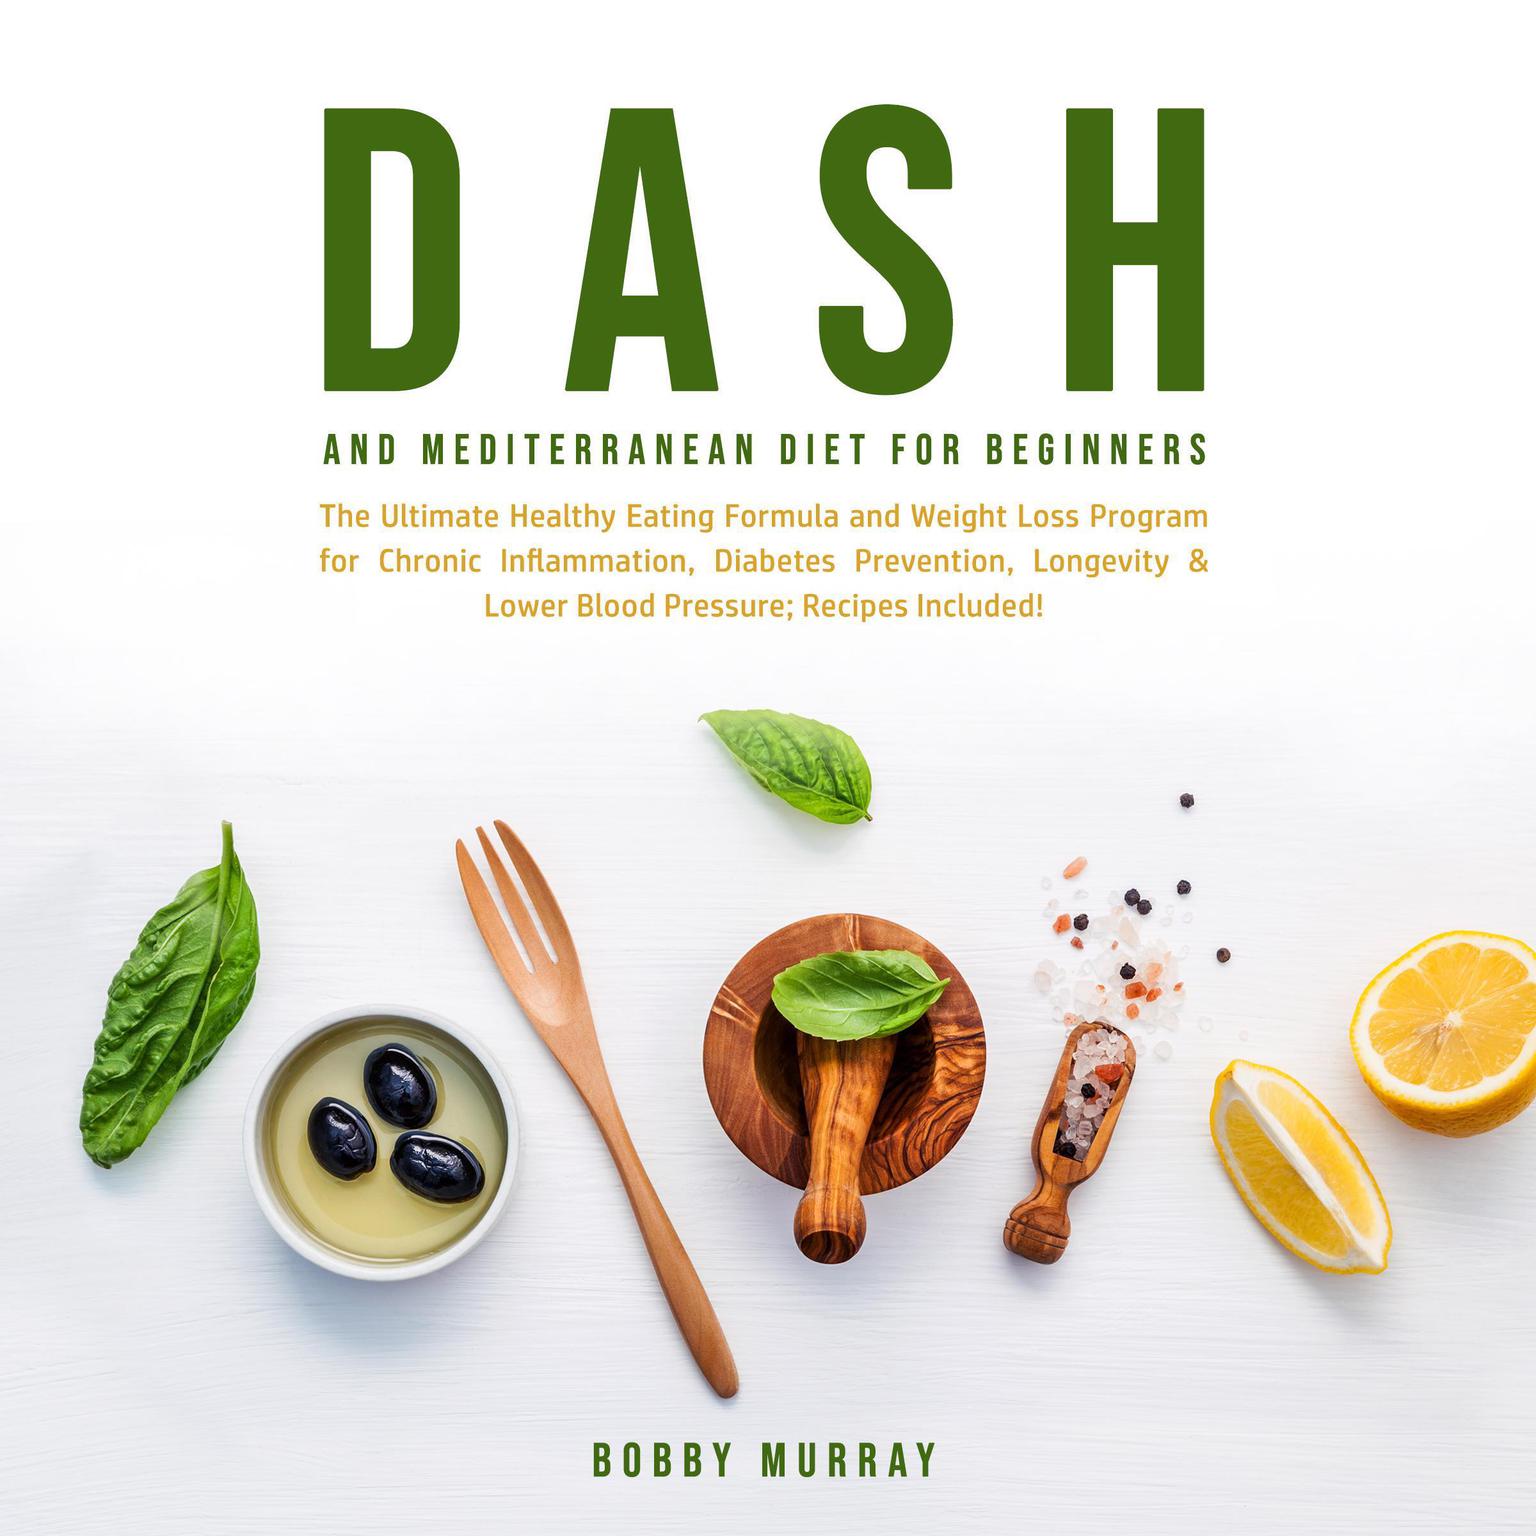 Dash and Mediterranean Diet for Beginners: The Ultimate Healthy Eating Formula and Weight Loss Program for Chronic Inflammation, Diabetes Prevention, Longevity & Lower Blood Pressure; Recipes Included! Audiobook, by Bobby Murray